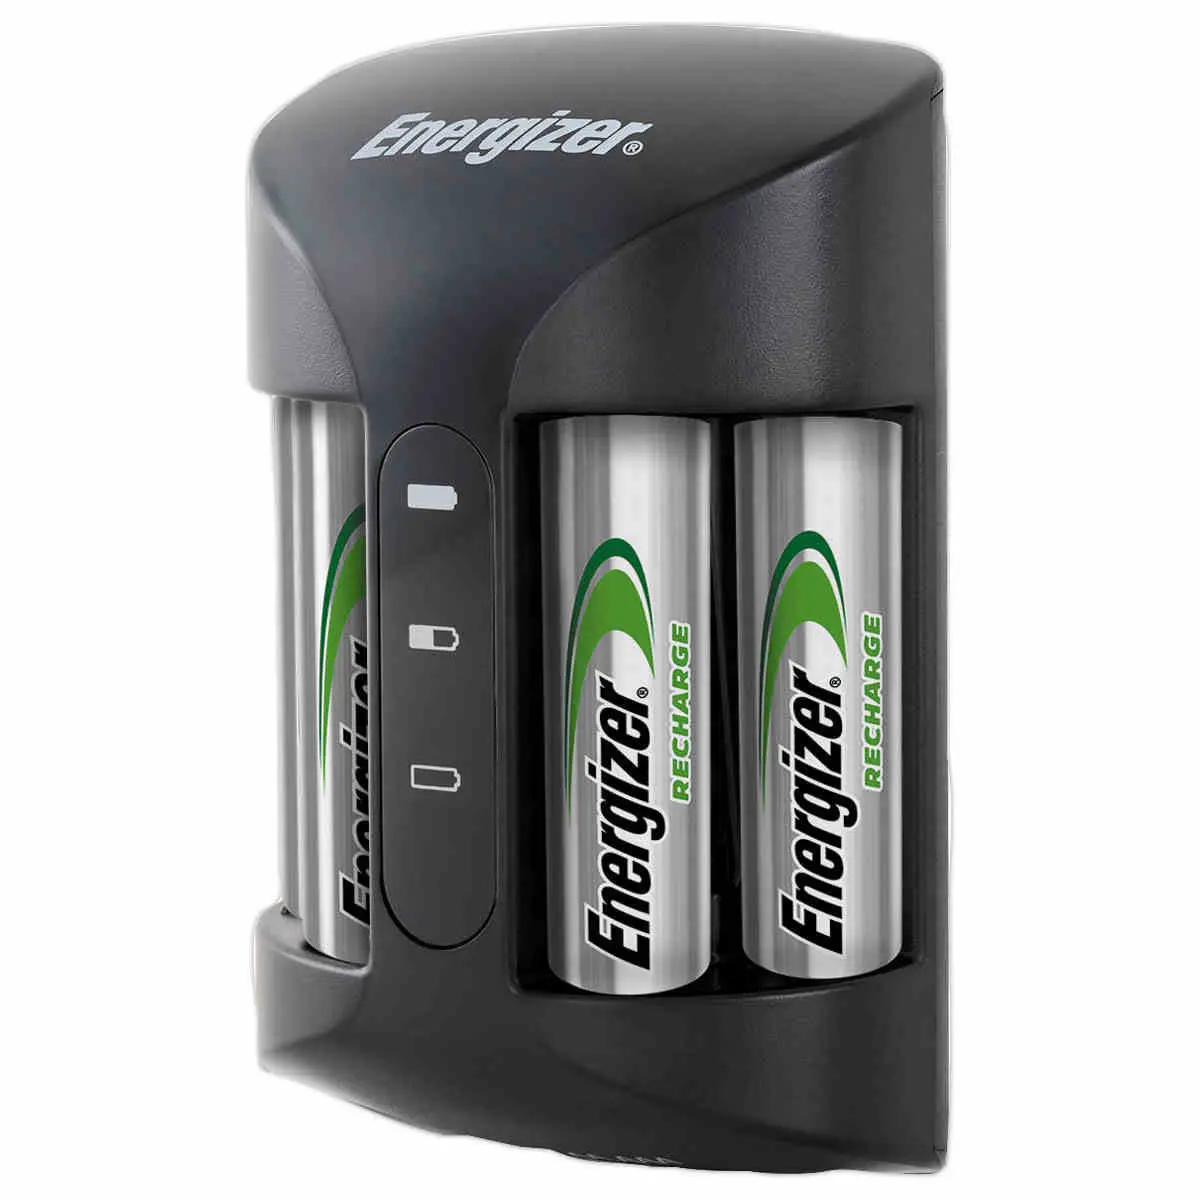 Chargeur intelligent 4 accus - Piles AA et AAA - ENERGIZER